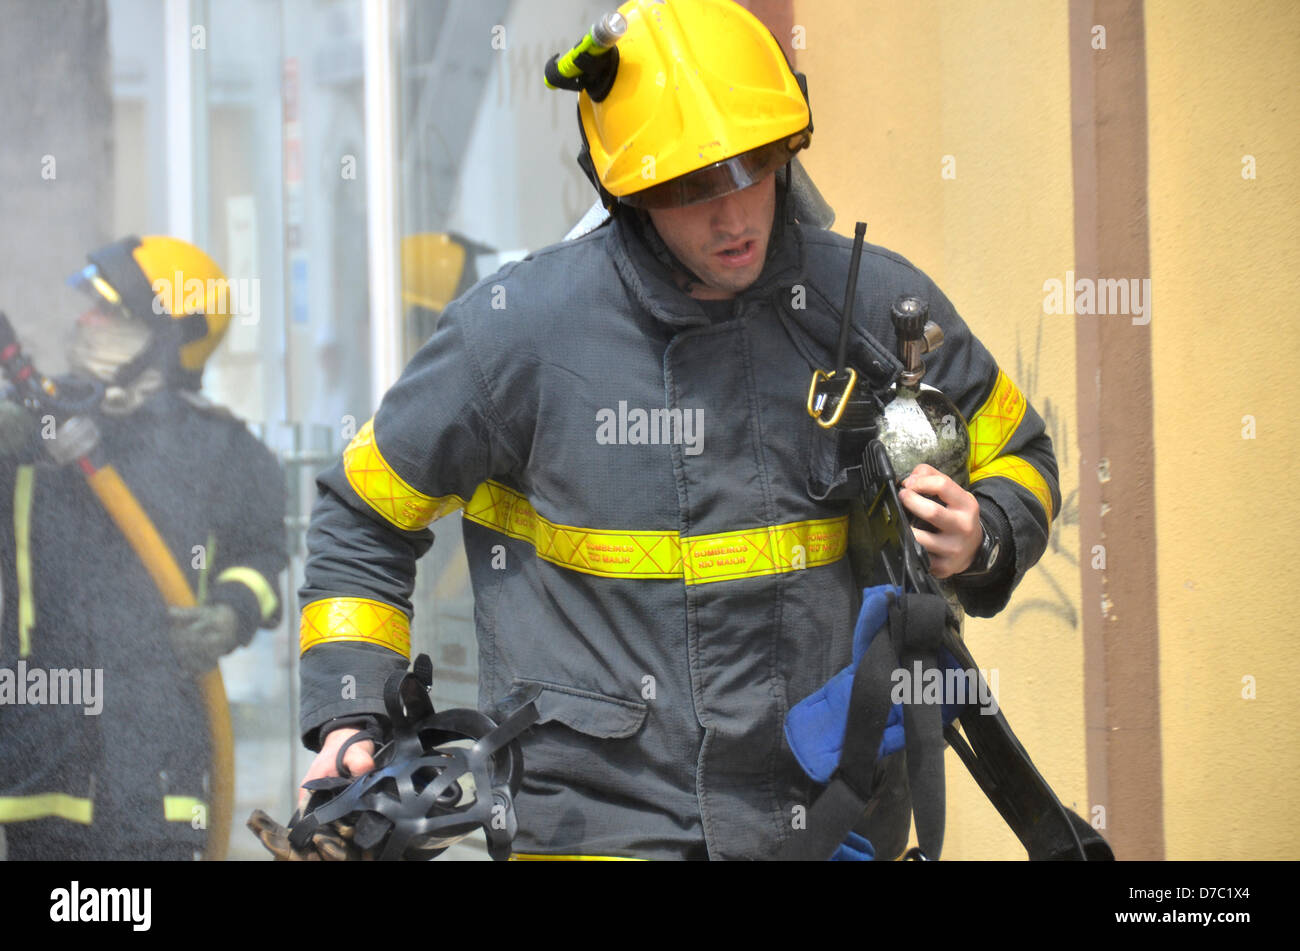 Rio Maior , Portugal. 3rd May 2013. . Firemans work toguether trying to save the building and houses close to the fire. The access to the area is difficult . Credit:  Bruno Monico / Alamy Live News Stock Photo